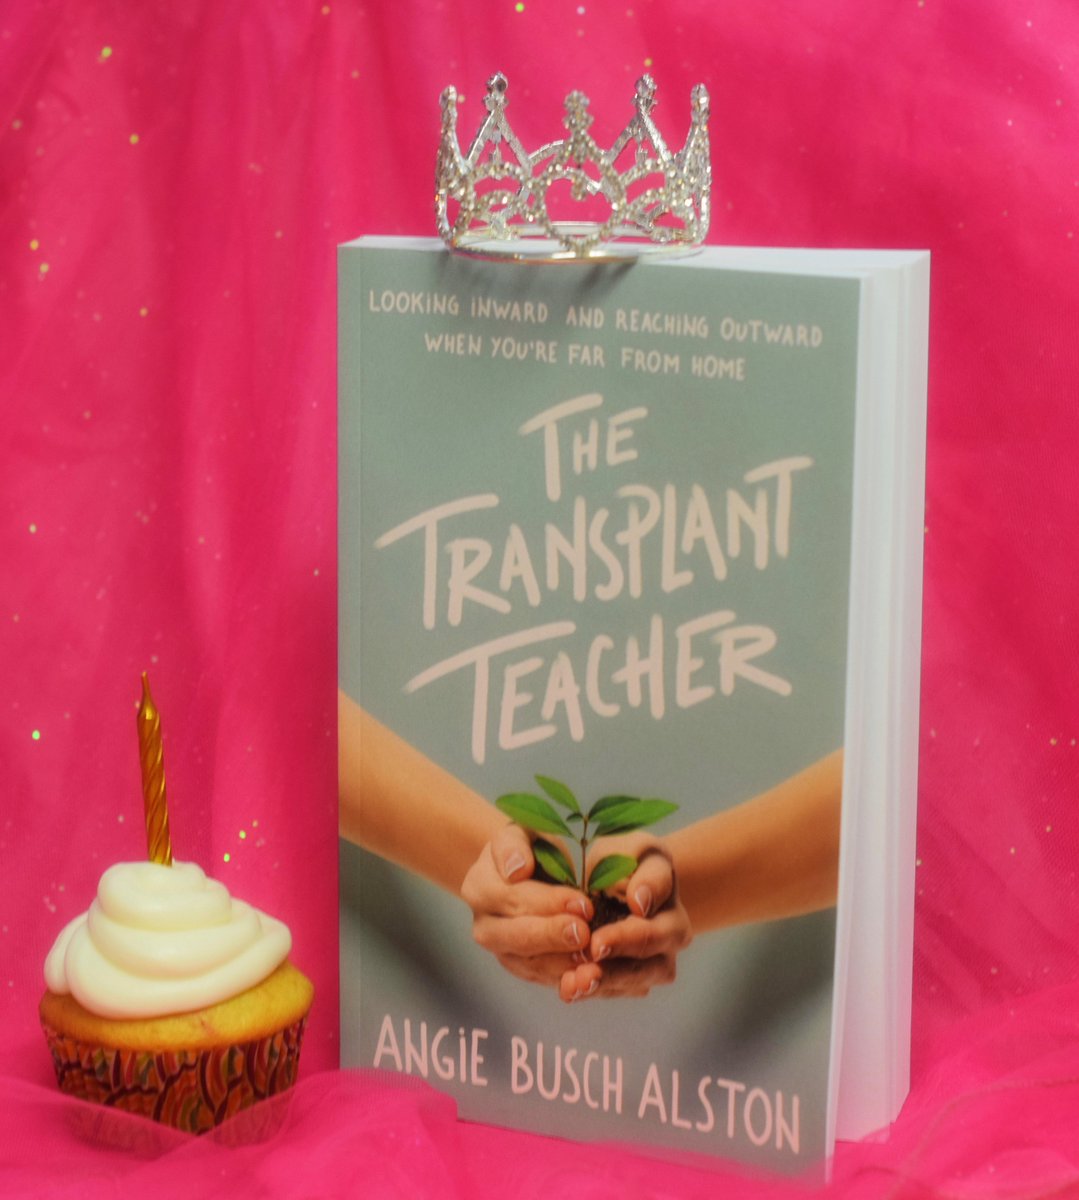 My book is one today! So proud to be its mom!!! amzn.to/30Wi4B1 #akedchat #teacherauthor #aked